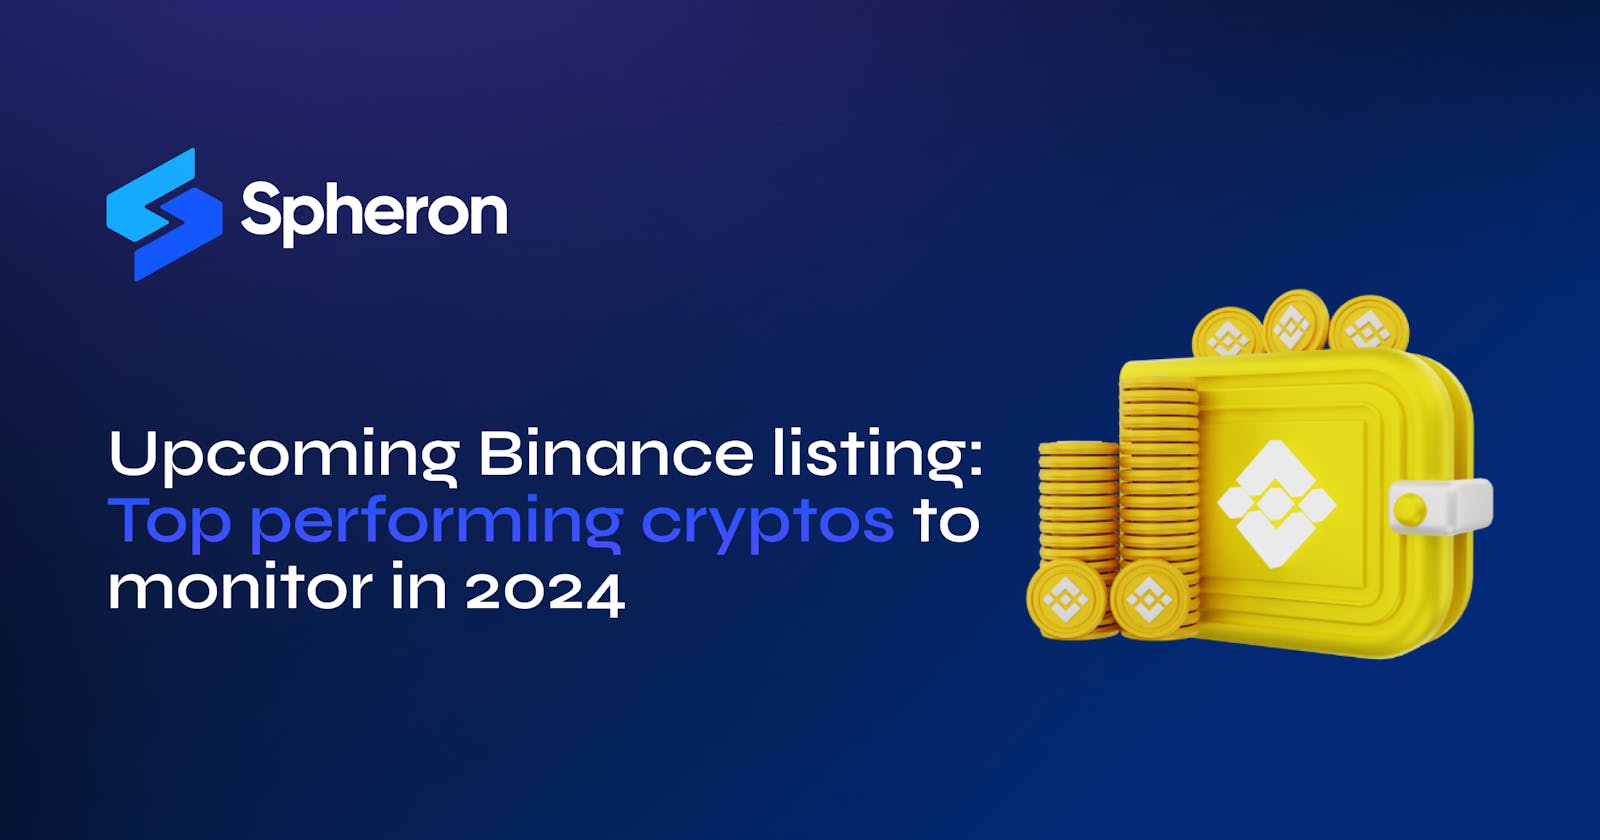 Upcoming Binance listing: Top 5 performing cryptos to monitor in 2024